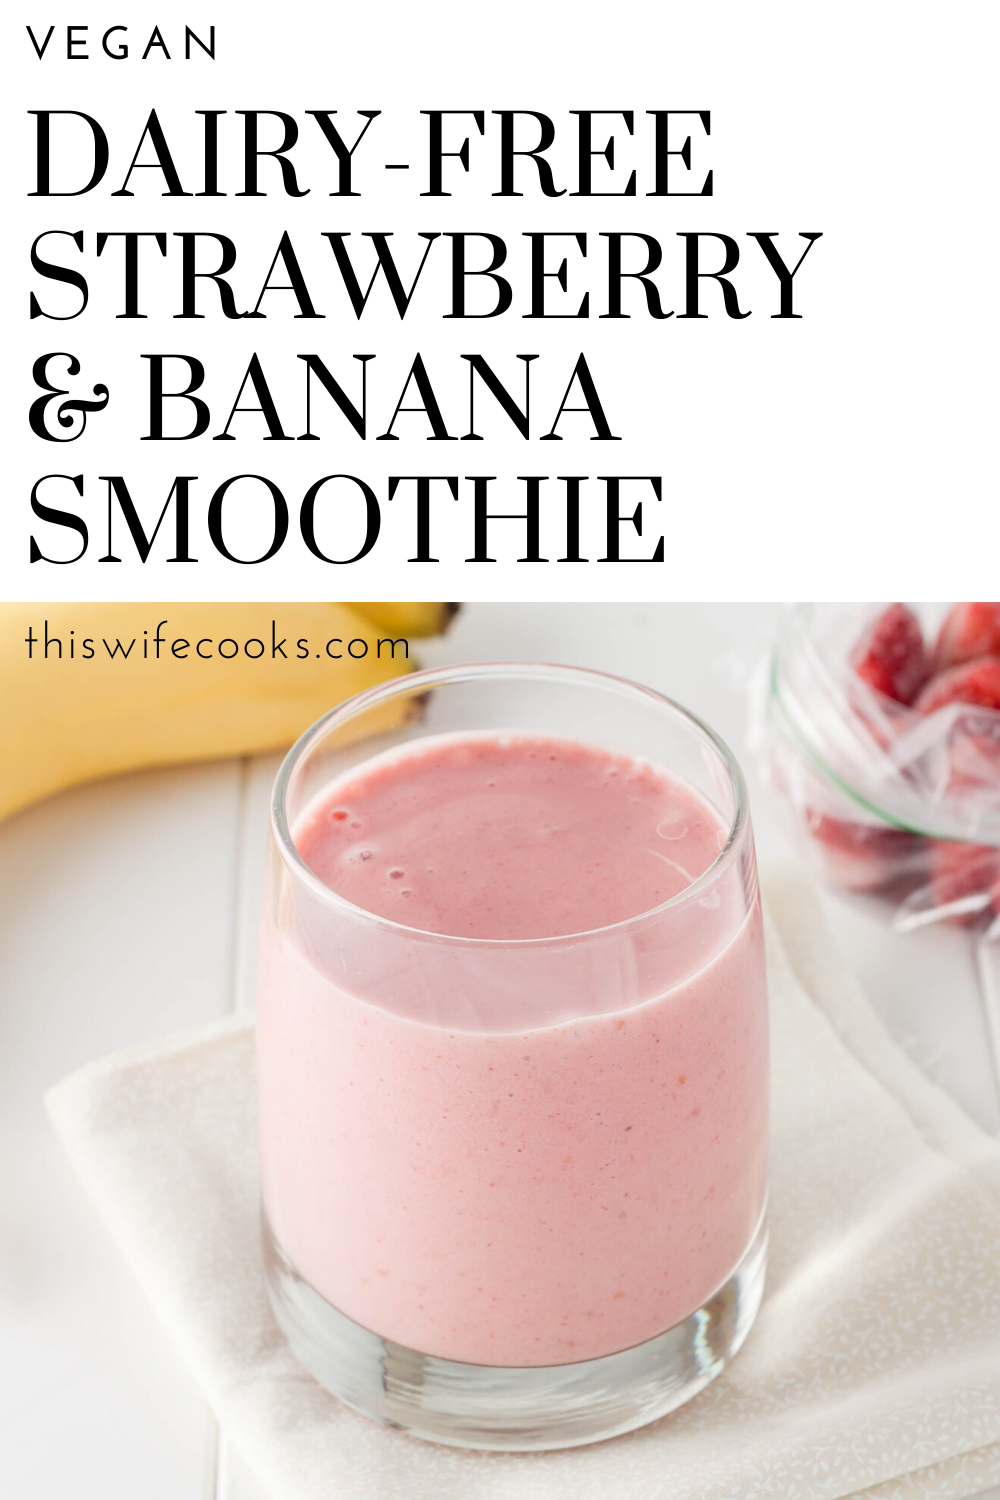 Dairy-Free Strawberry and Banana Smoothie - Three ingredient is all you need to whip up this dairy-free and vegan version of the classic smoothie favorite! via @thiswifecooks